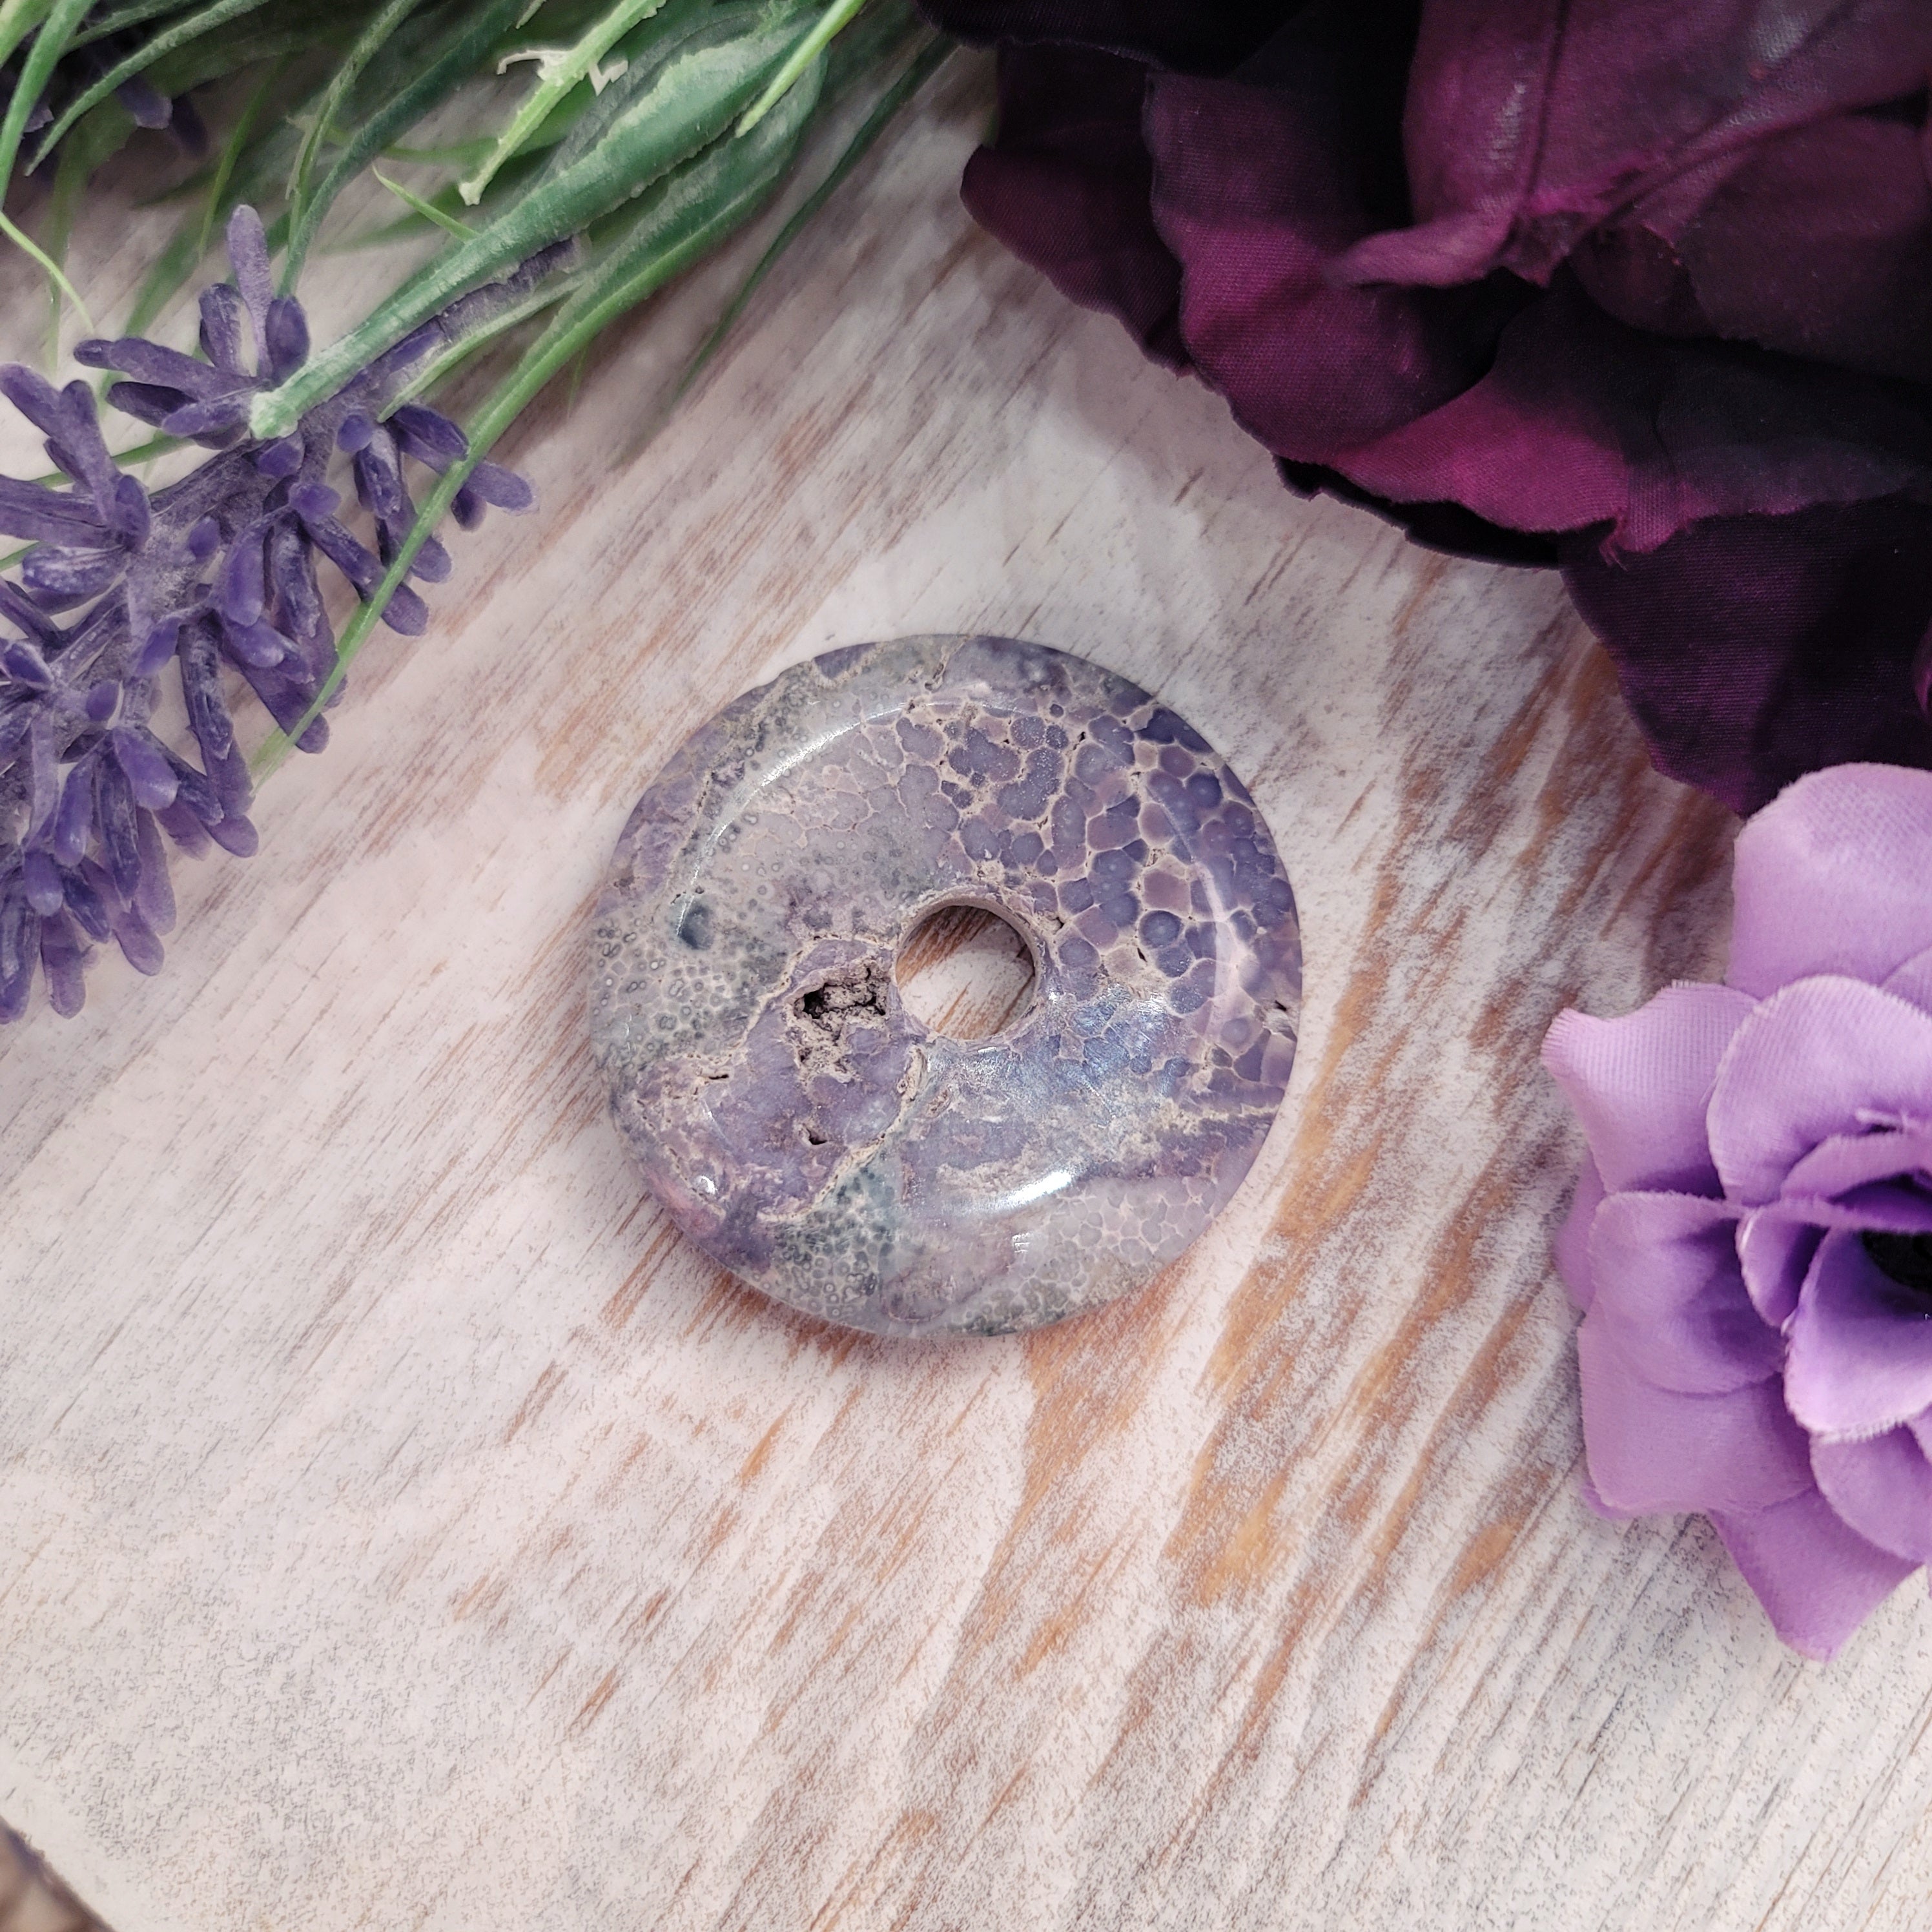 Grape Agate Purple Chalcedony Donut Pendant for Dream Recall, Intuition and Meditation